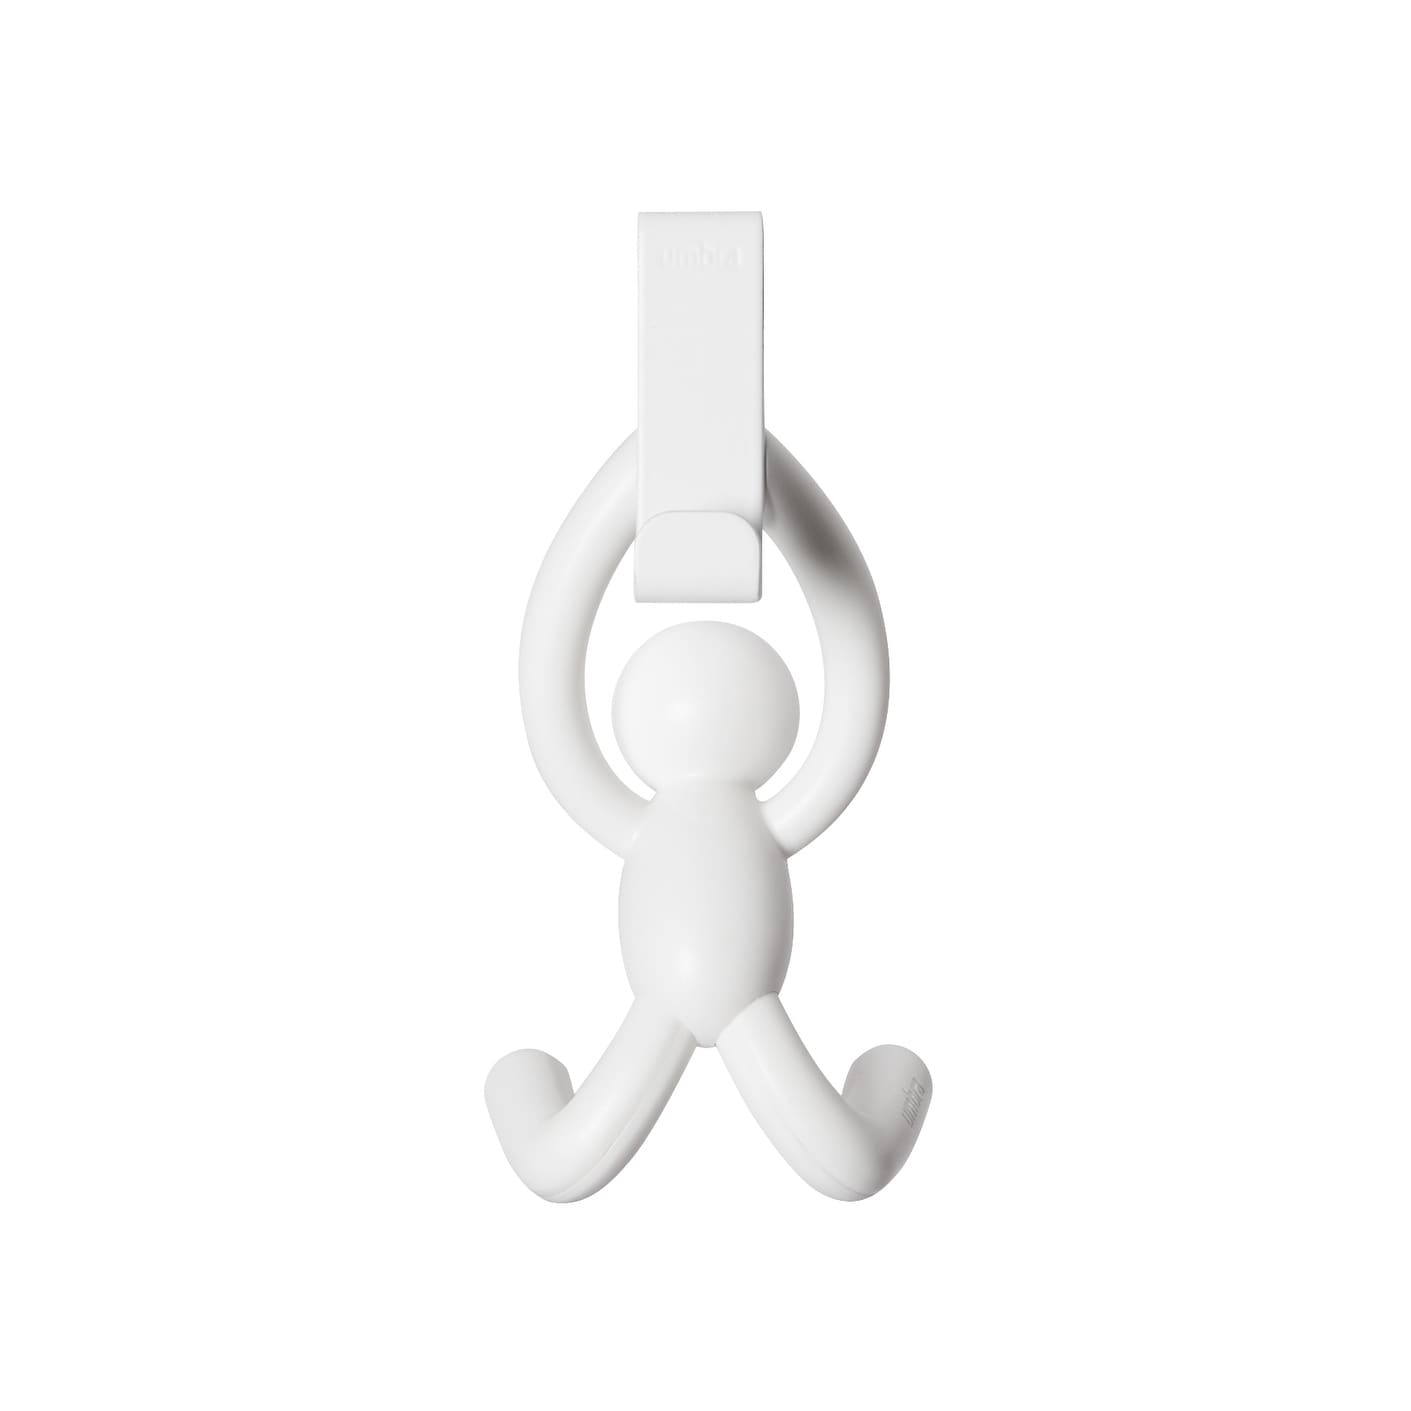 Umbra, White Buddy 4 Decorative Wall Mounted Door Hook for Hanging